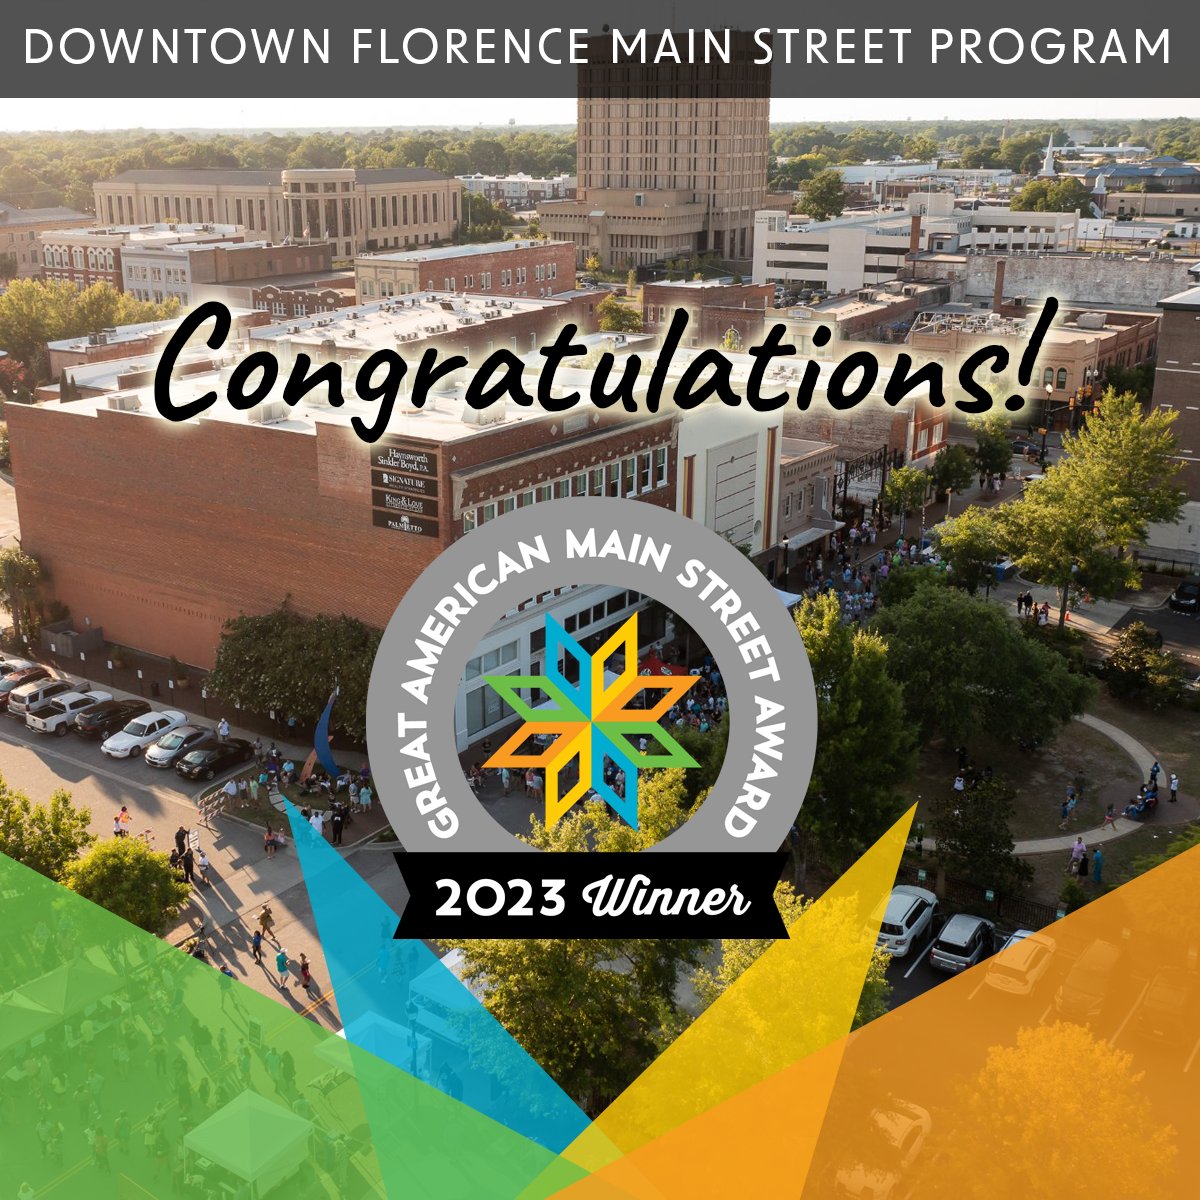 Congratulations to @scflorencecity and their Downtown Florence Main Street Program on their 2023 Great American Main Street Award win! 

This award last came to South Carolina twenty years ago in…